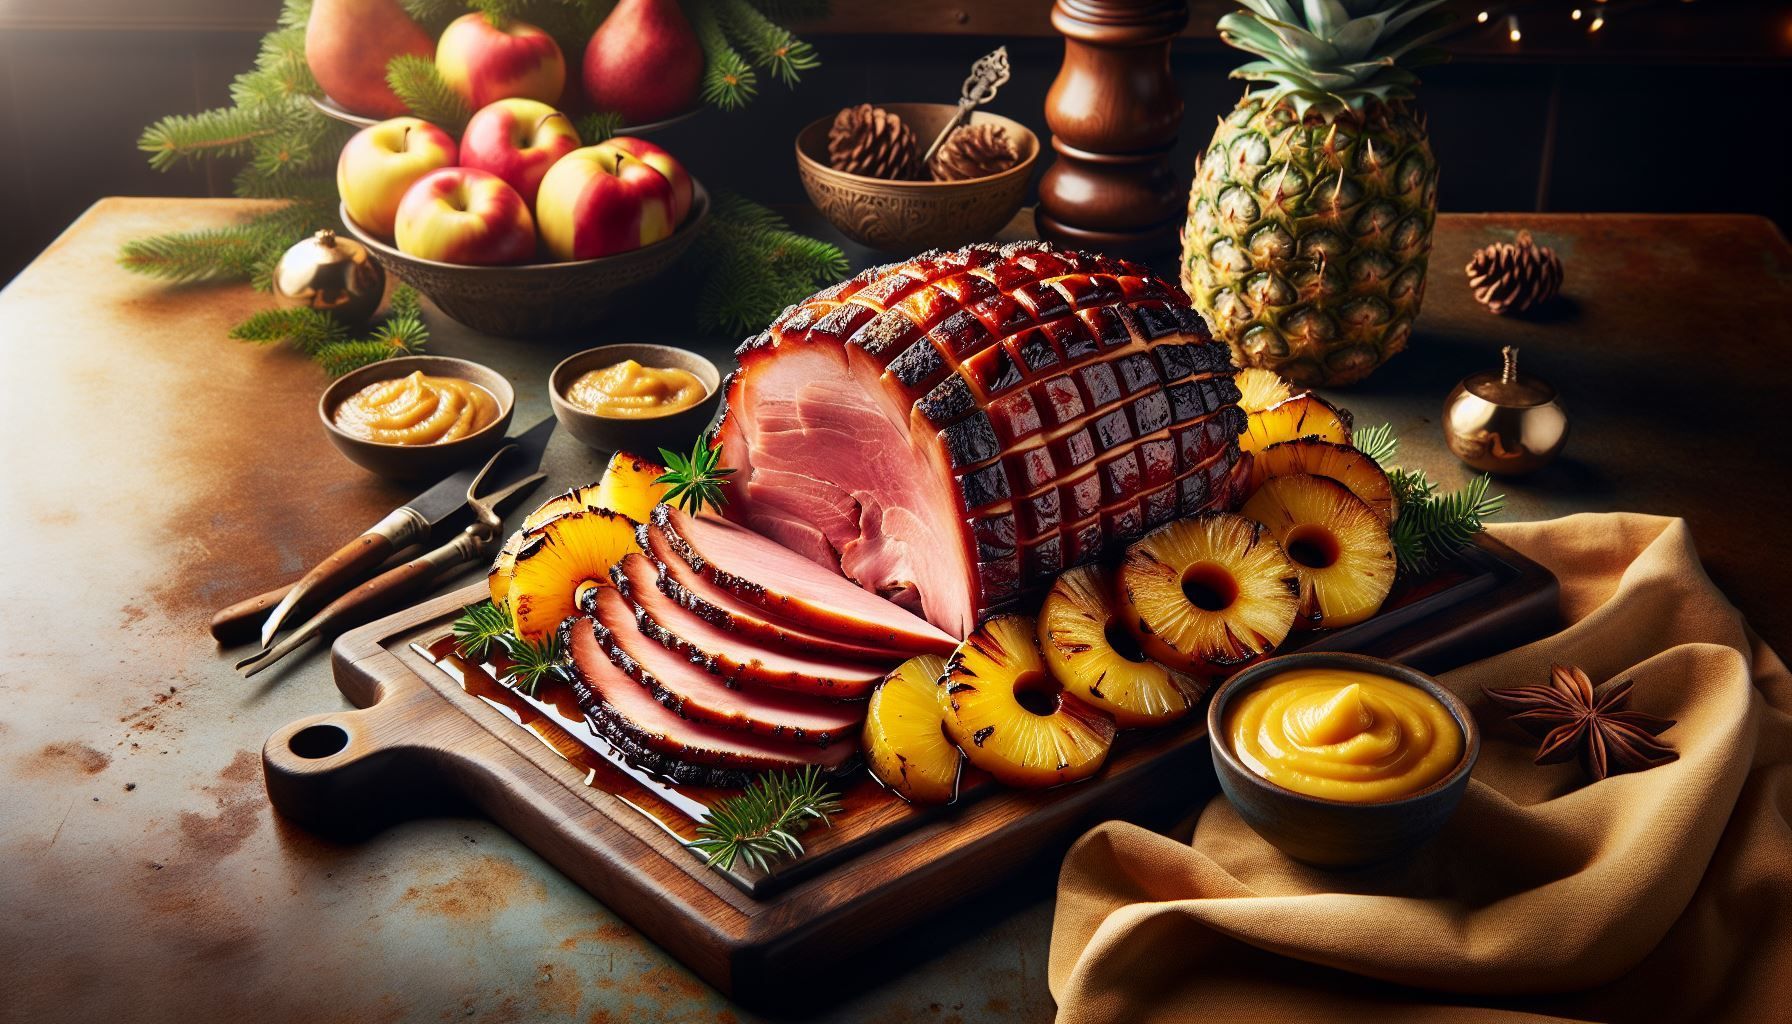 A ham with pineapple slices on a wooden cutting board on a table.